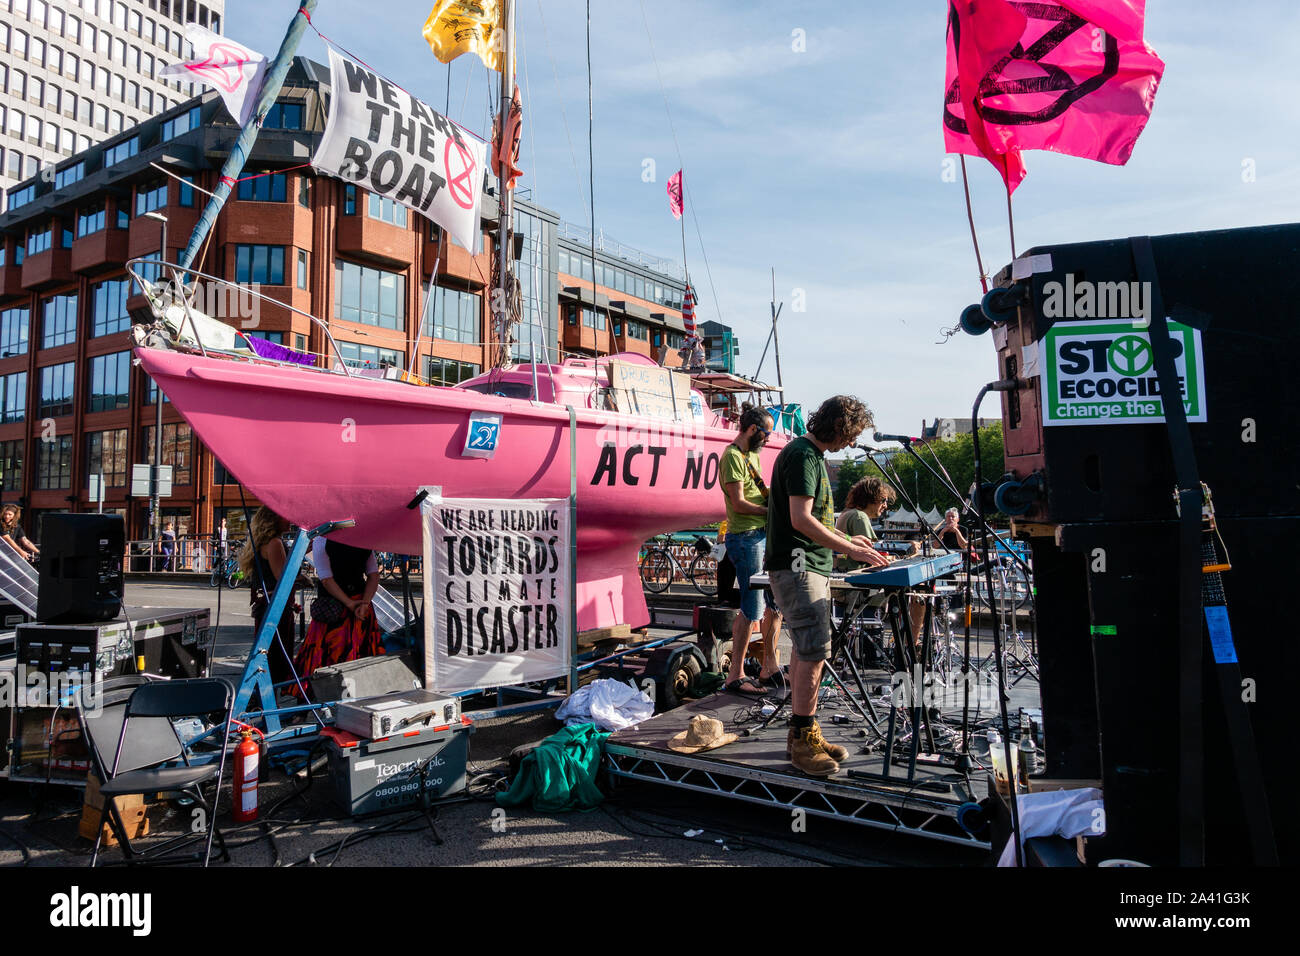 Extinction rebellion summer uprising protests in Bristol on July 18th 2019 - protesters occupying Bristol Bridge, Bristol, UK, with boat and band Stock Photo